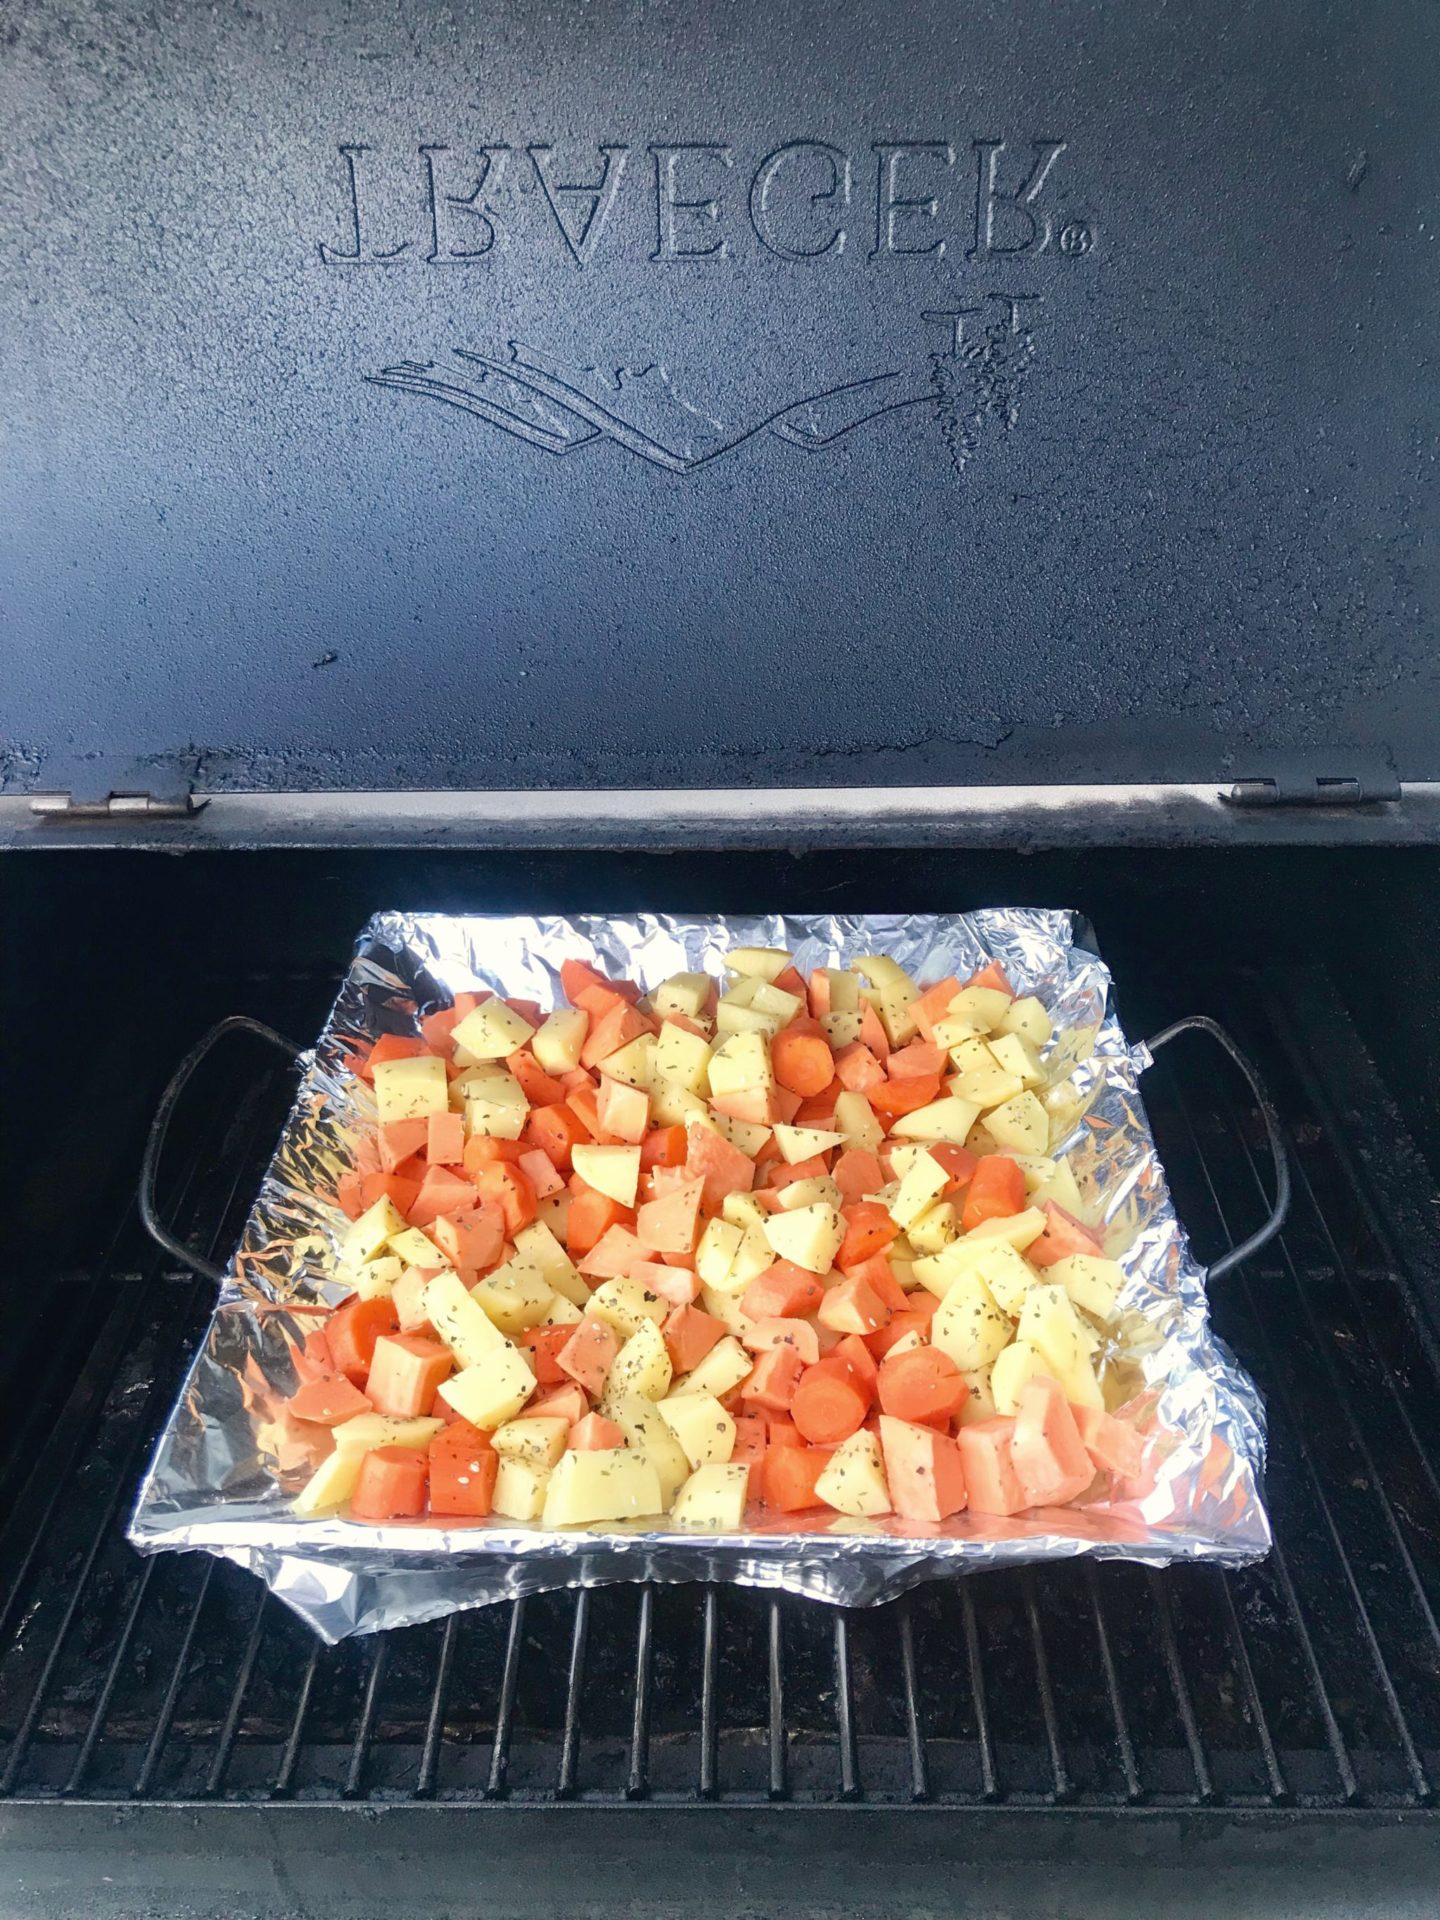 roasted veggies, vegetables, root veggies, potatoes, carrots, yams, sweet potatoes.  good to eat, gluten free, on the grill, traeger